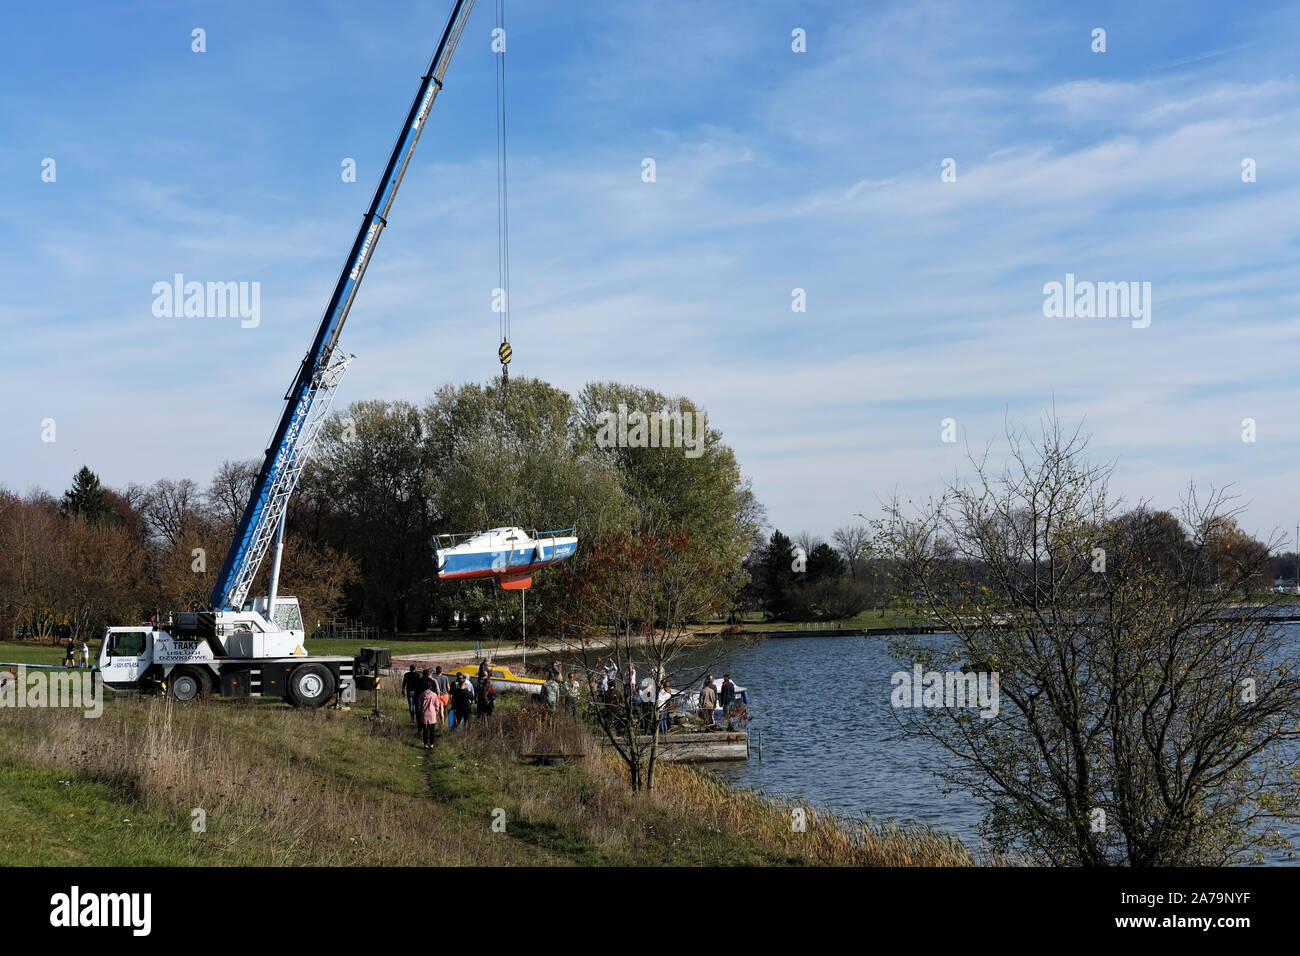 Zalew Zemborzycki, Lublin, Poland. 10/26/2019. End of season at the lake. Crane pulling a sailing boat of the water before winter Stock Photo